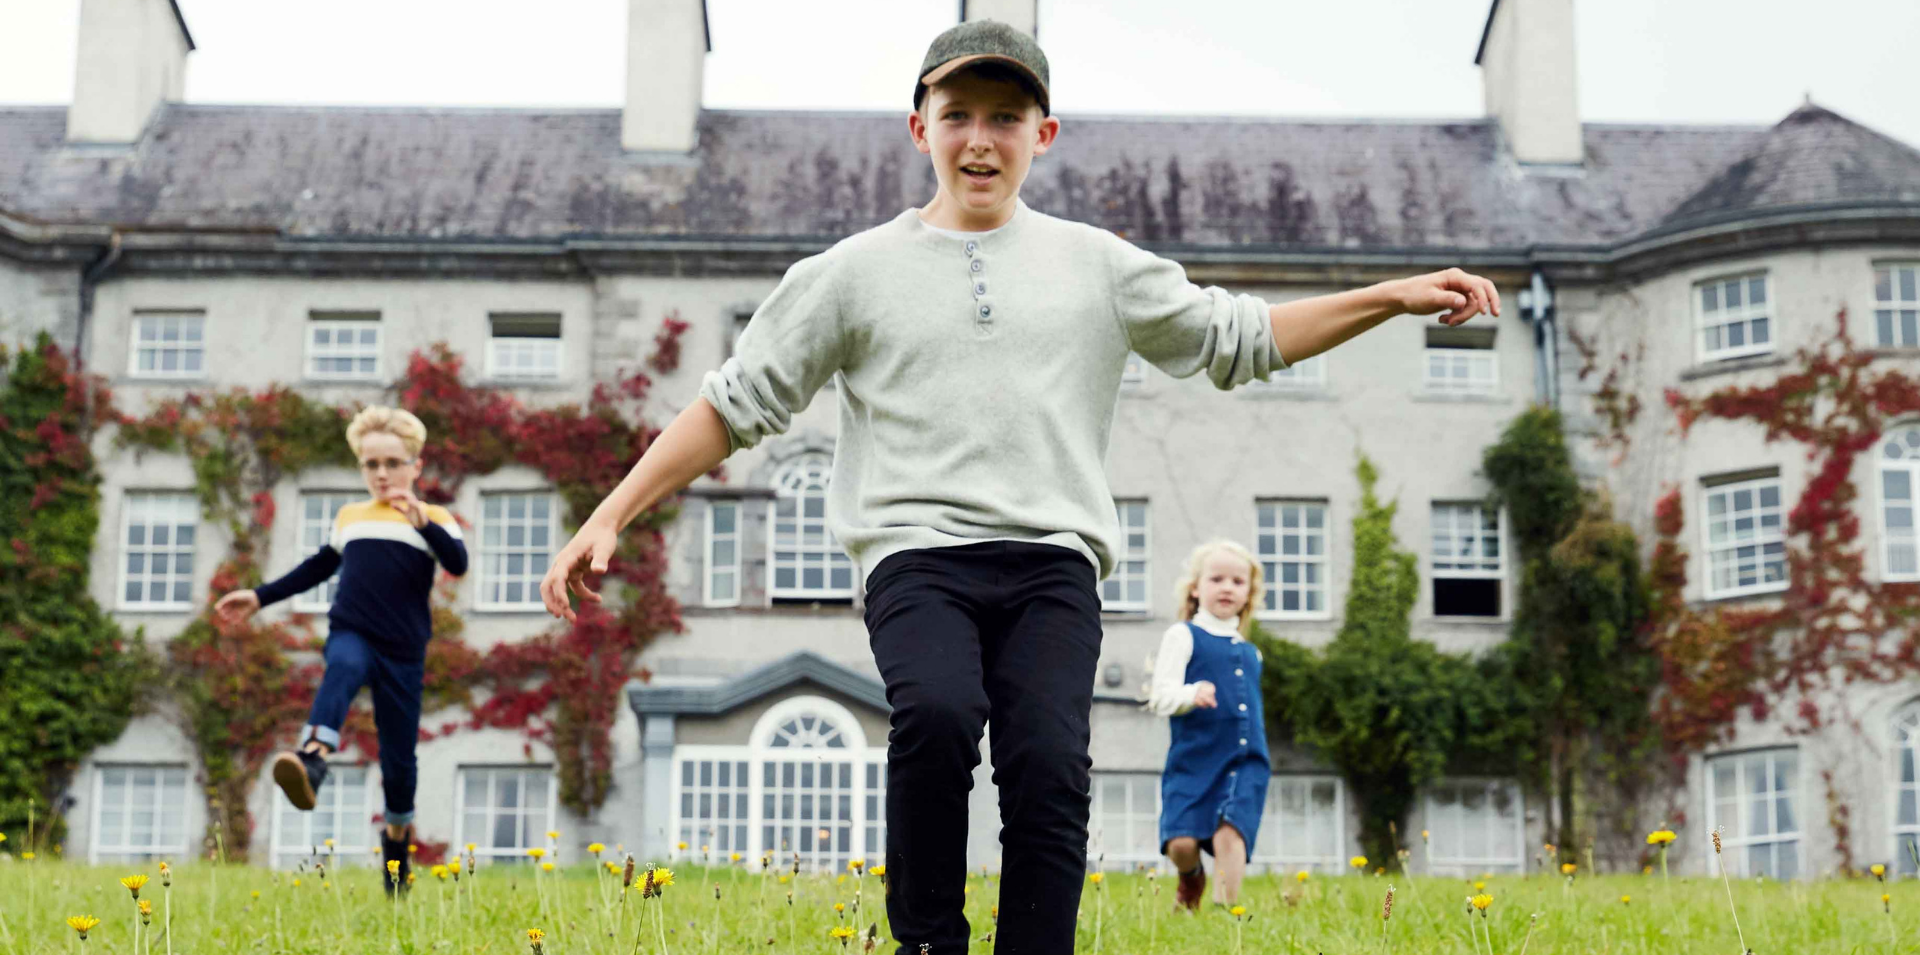 2 Night Family Easter Escape – with Dinner on One Night and Access to Junior Club (including kids meals) from €499 per night